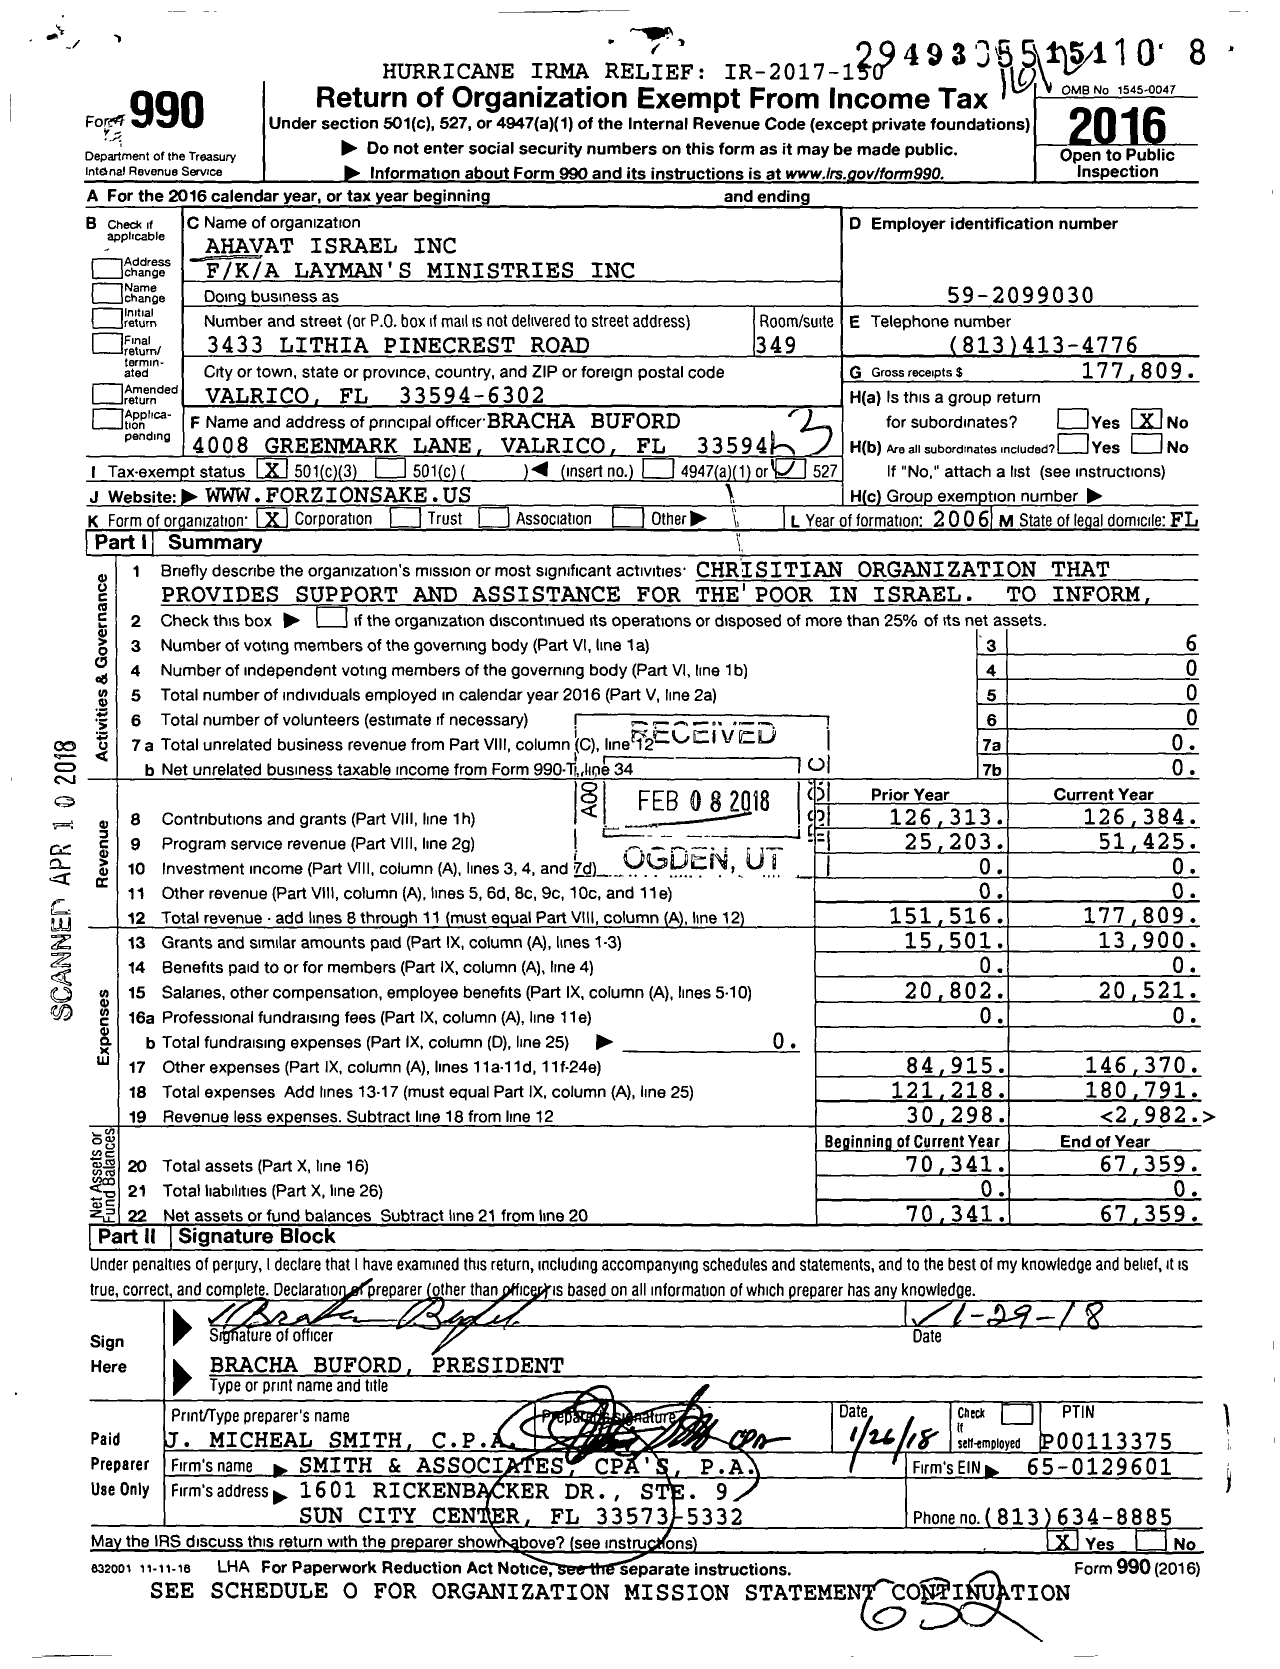 Image of first page of 2016 Form 990 for For Zion's Sake Ministries / Ahavat Israel Inc F / K / A Layman's Ministries Inc